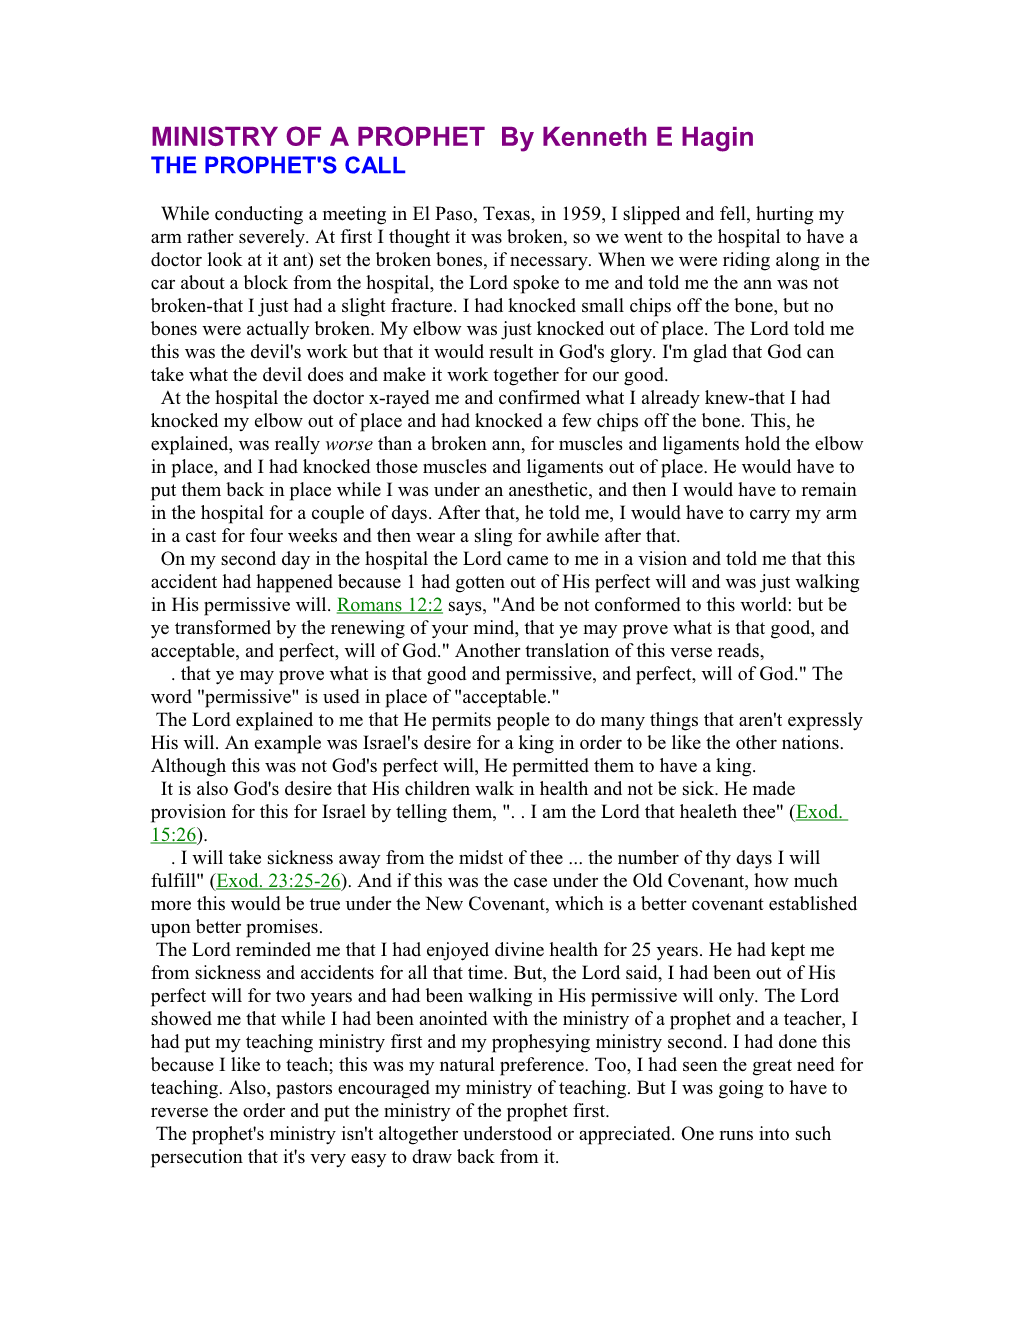 MINISTRY of a PROPHET by Kenneth E Hagin